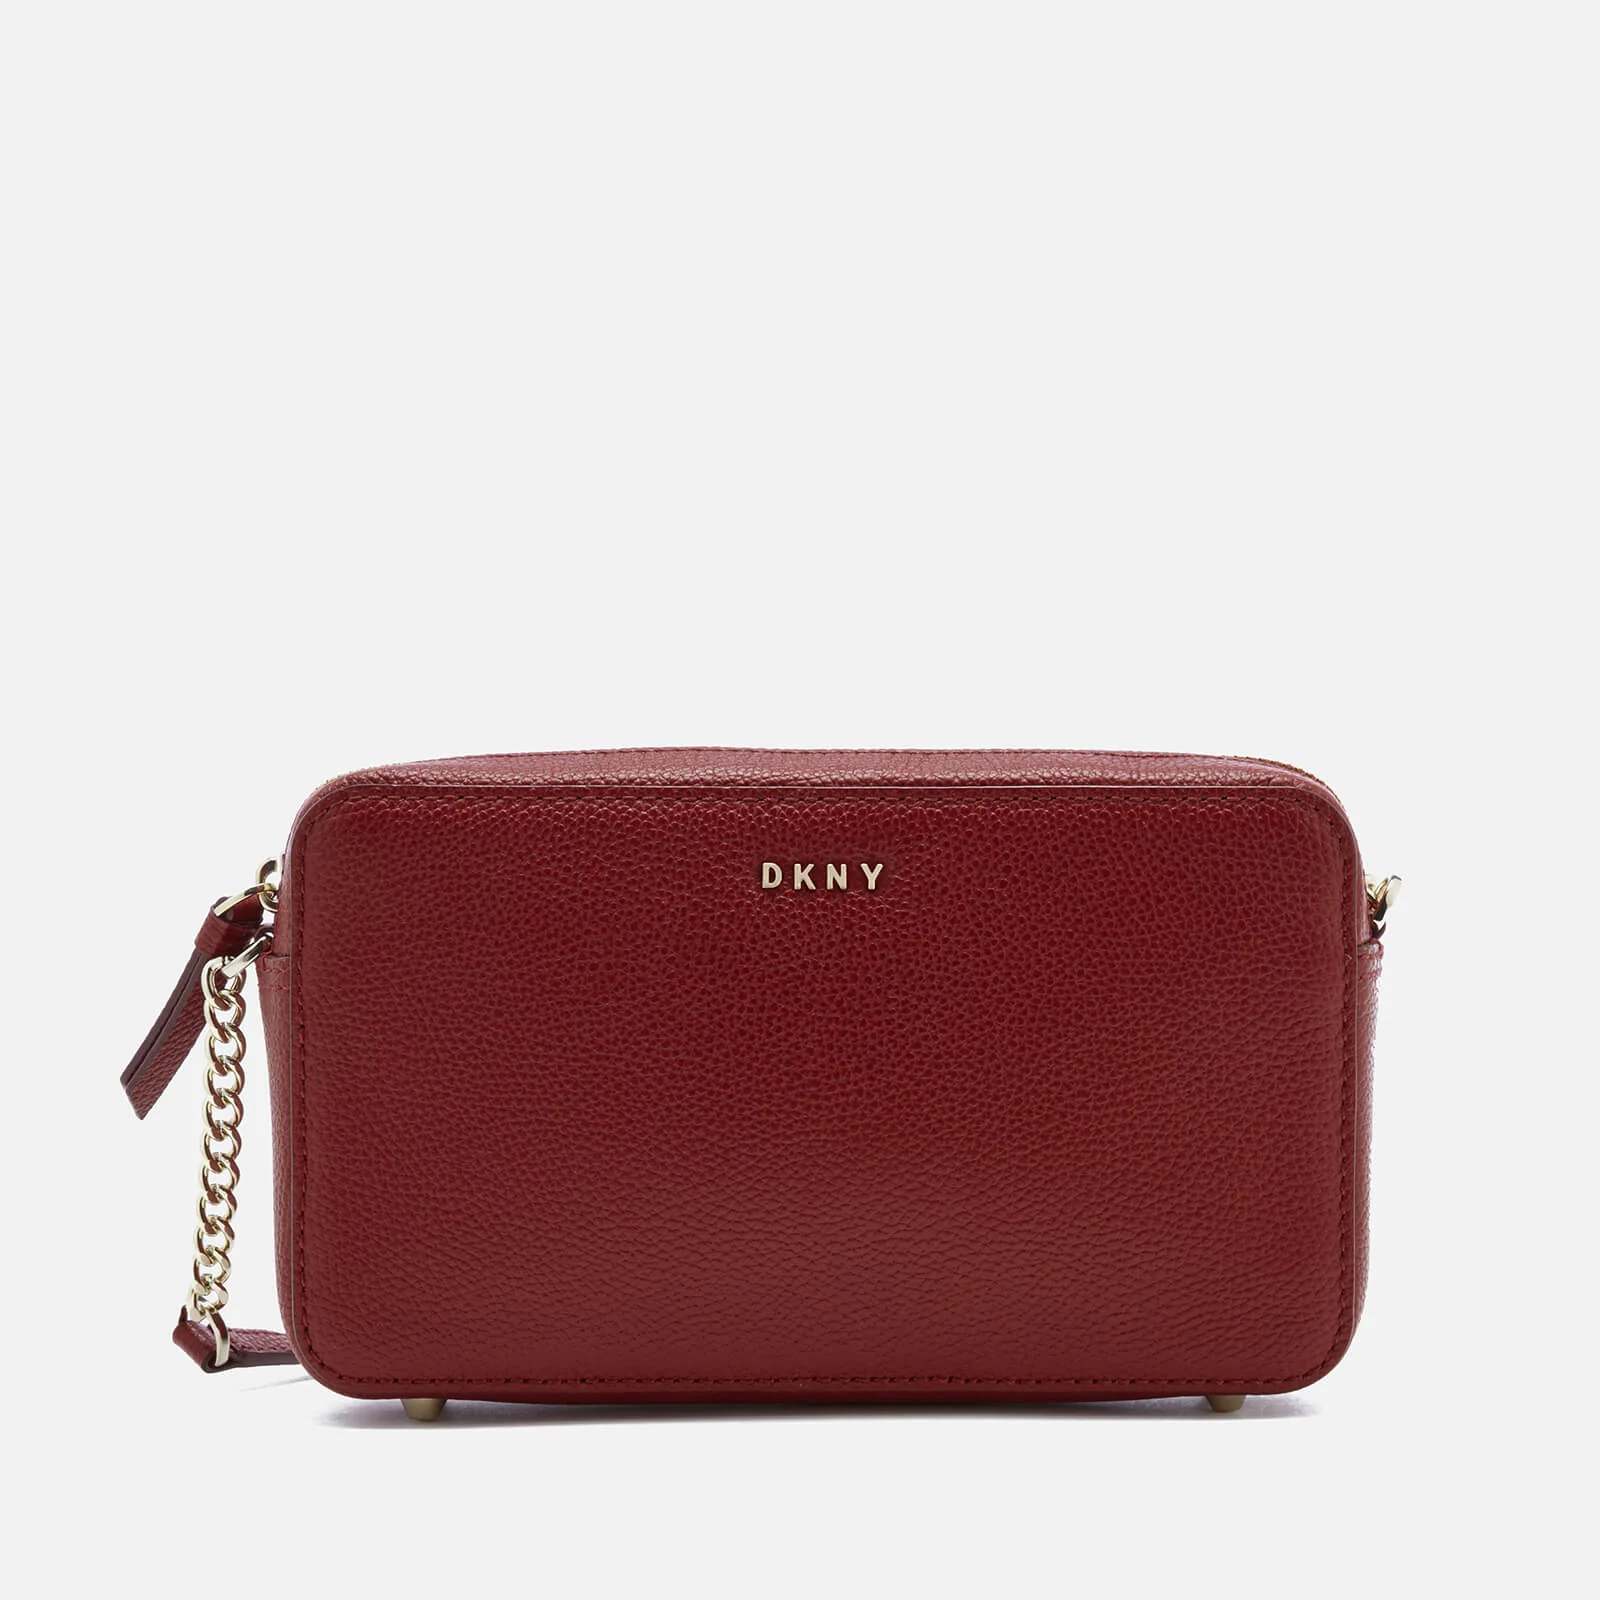 DKNY Women's Chelsea Pebbled Small Leather Top Zip Cross Body Bag - Scarlet Image 1